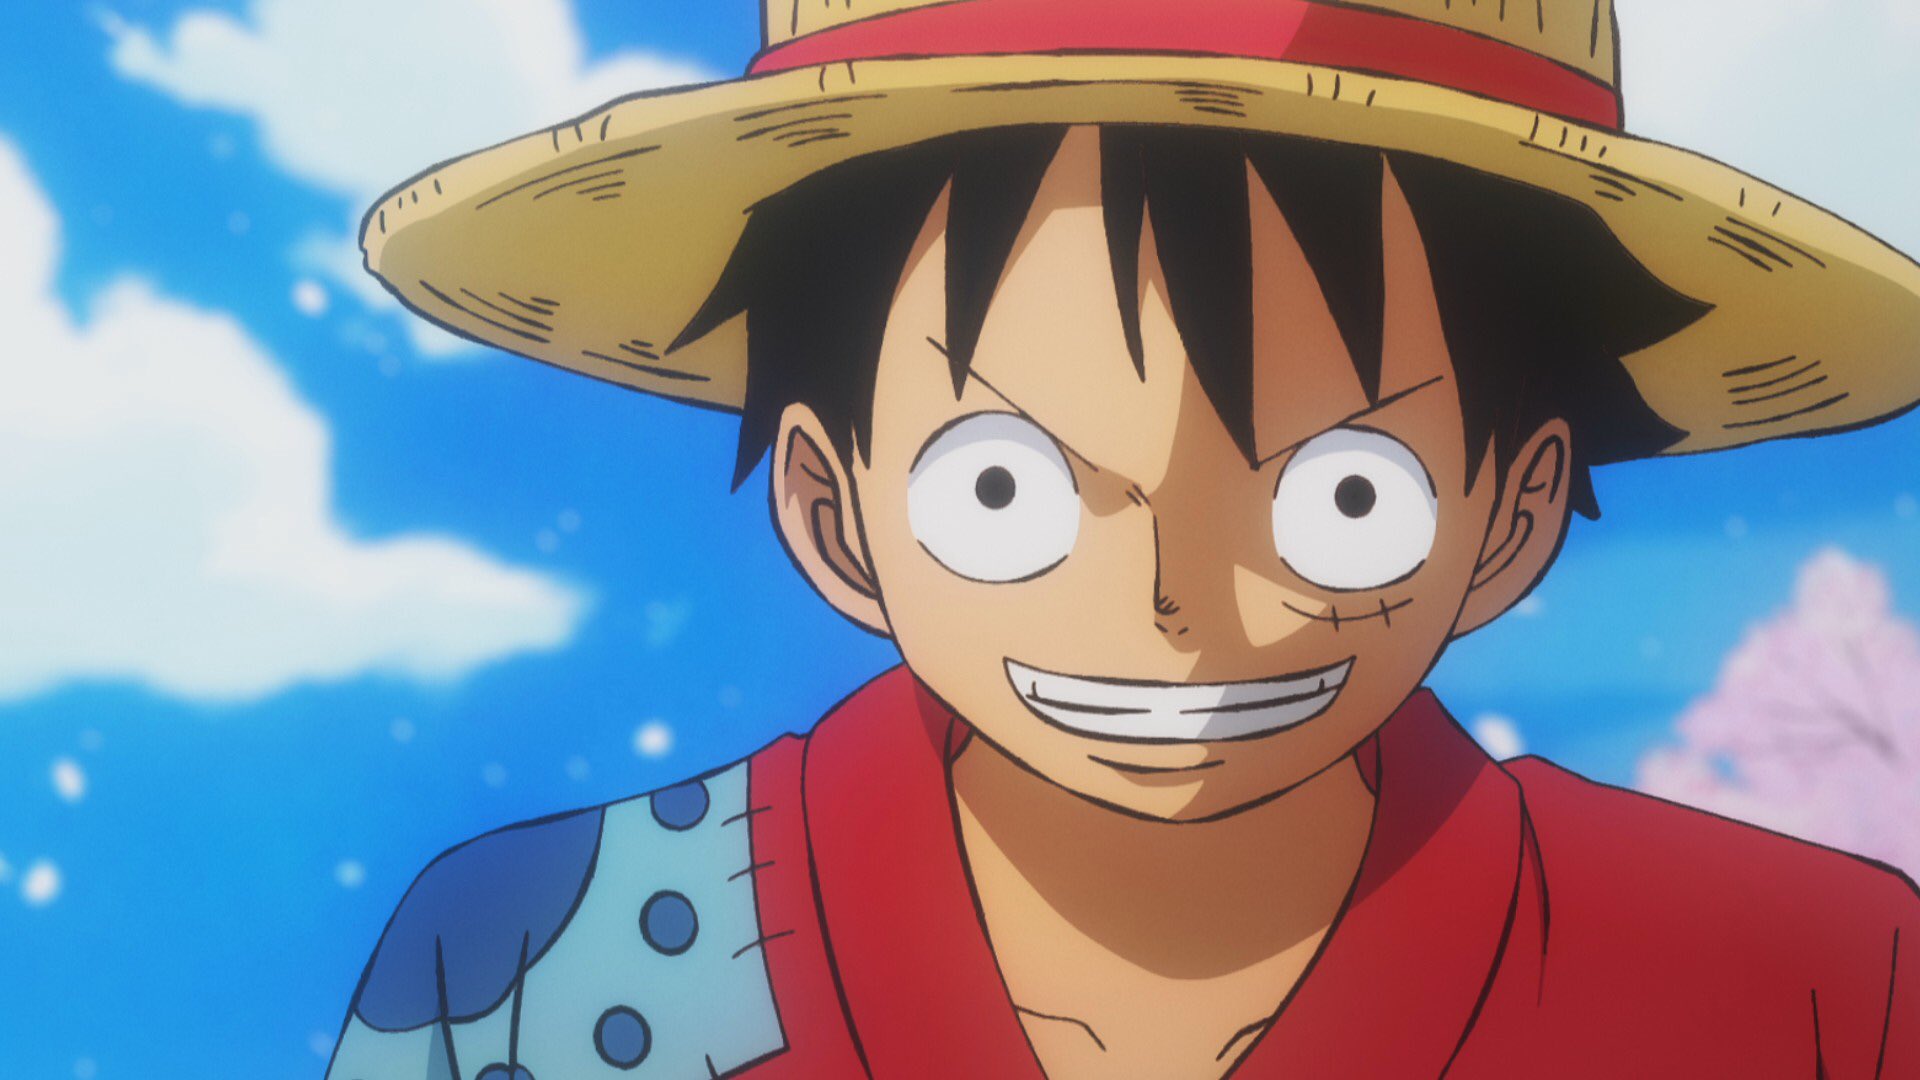 One Piece スタッフ 公式 Official 新主題歌 Over The Top 開始ゼロ秒から見逃せない ワノ国 Onepiece T Co tdpdk8as Twitter